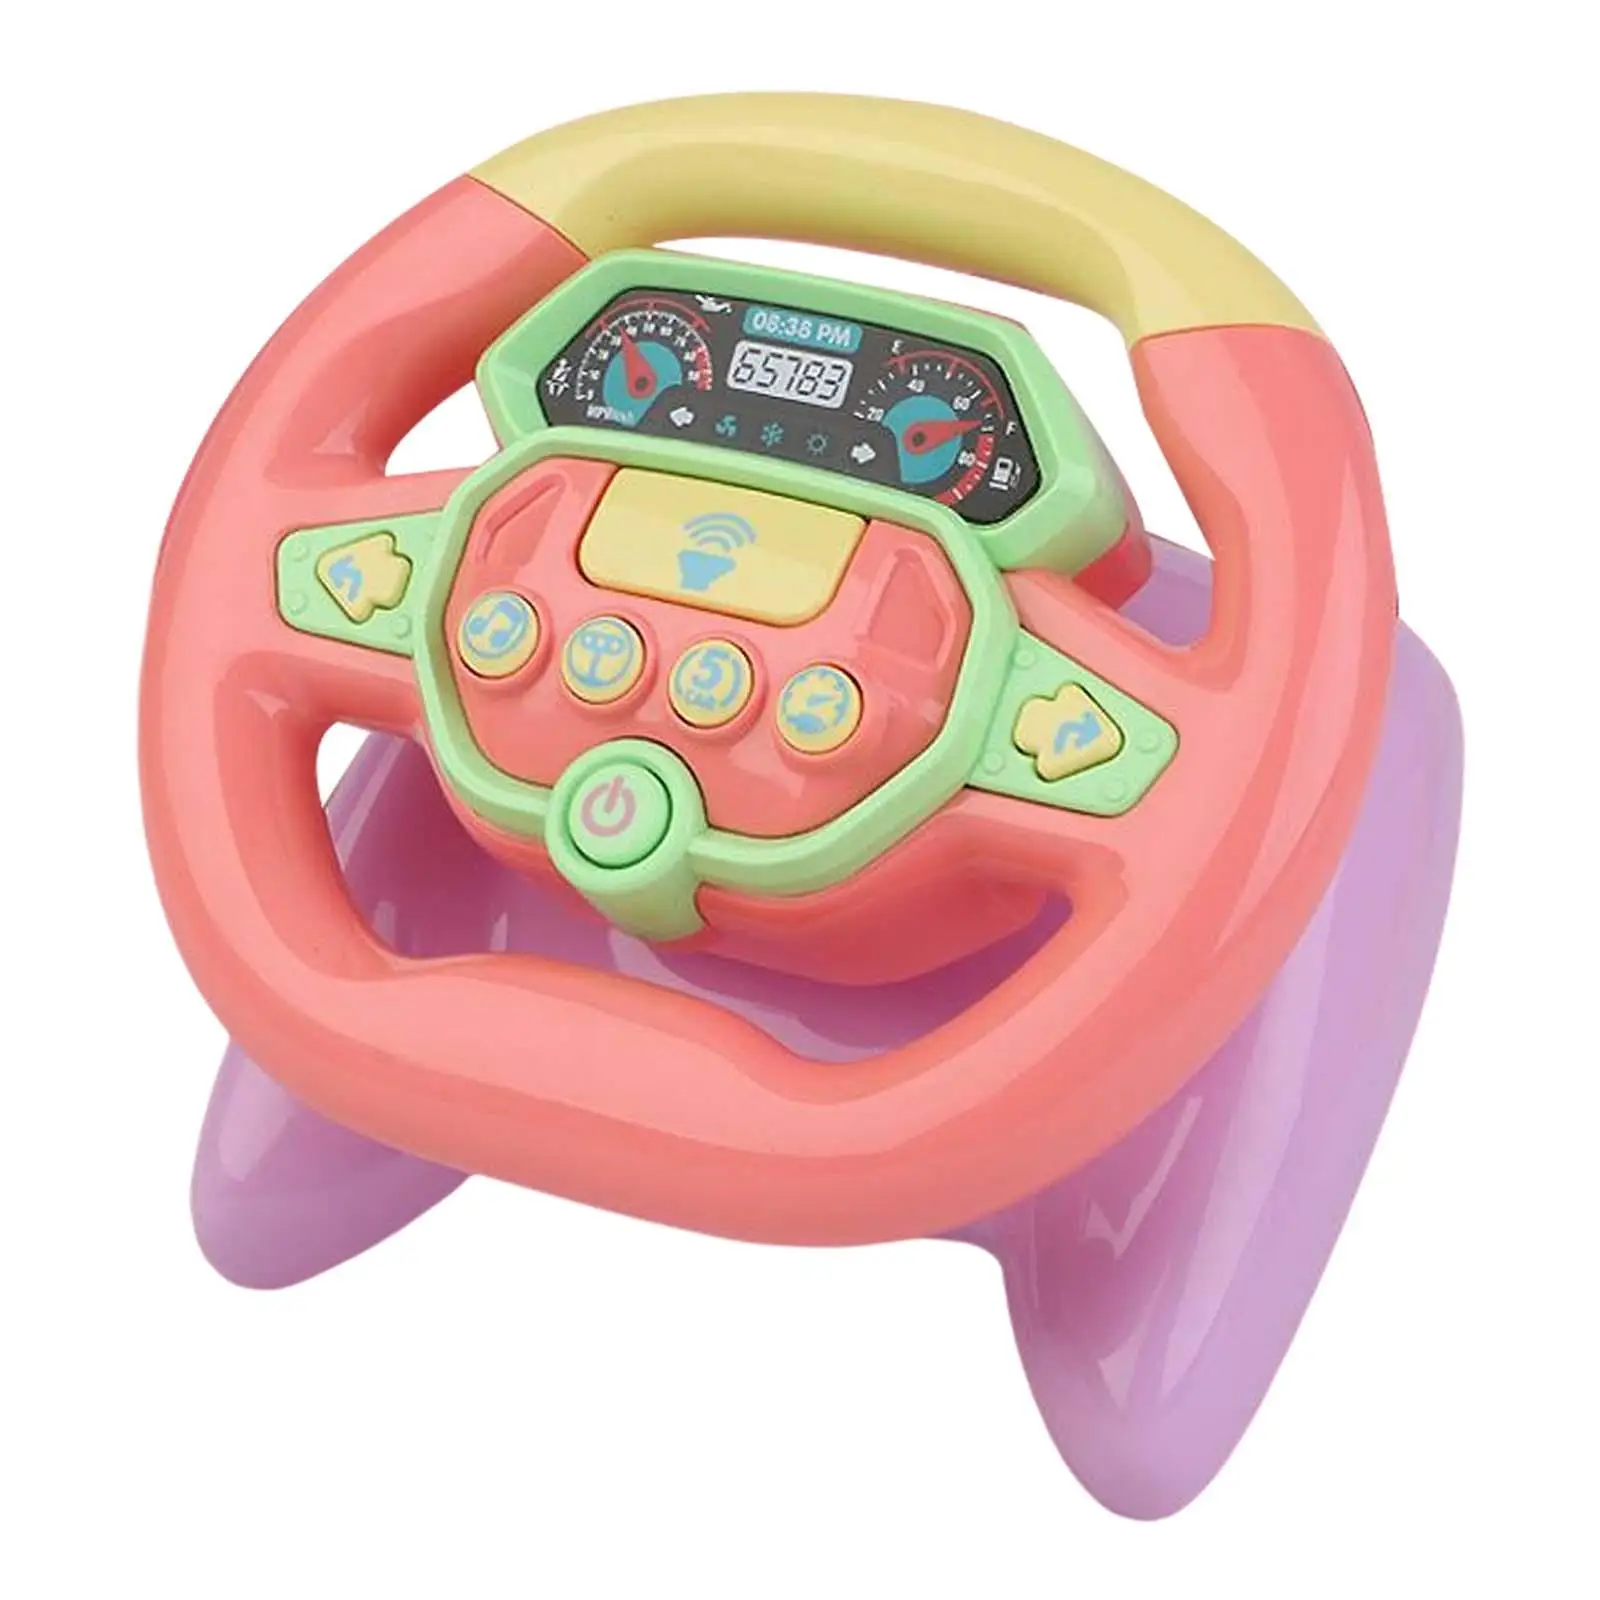 Rotating Simulated Driving Steering Wheel Toy, Early Learning Toys, Pretend to Drive, Girls, Birthday Gifts,